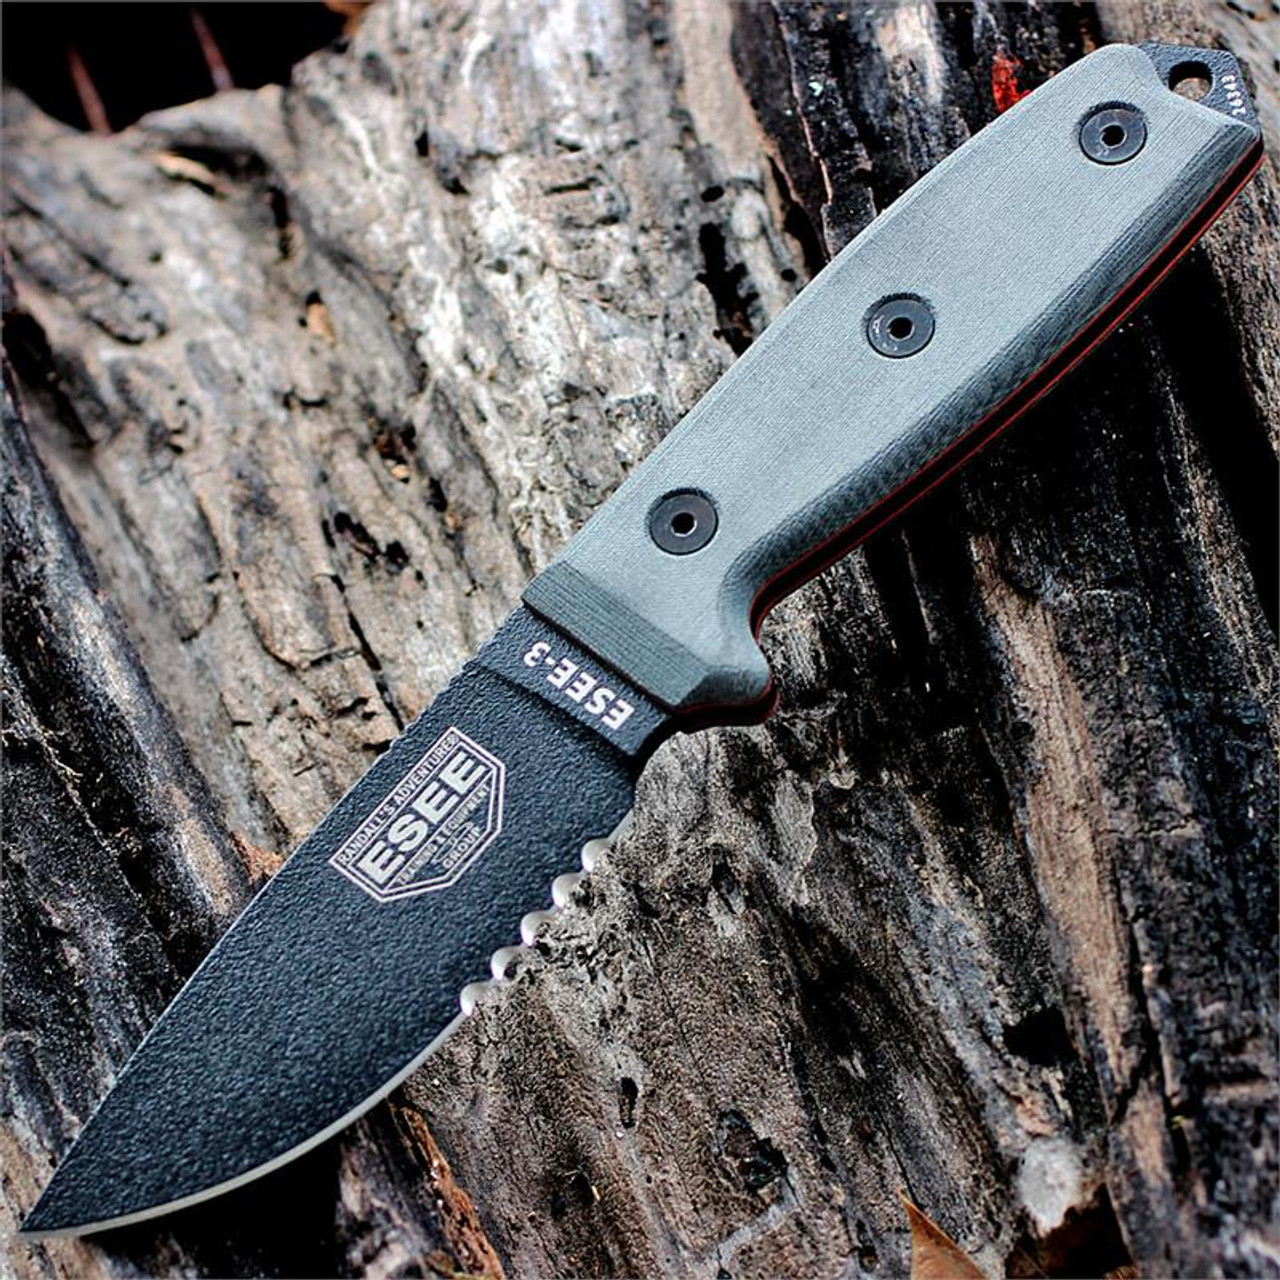 ESEE-3 Fixed Blade Knife (ESEE-3S-B)- 3.88" Black 1095 Partially Serrated Drop Point Blade, Gray Micarta Handle